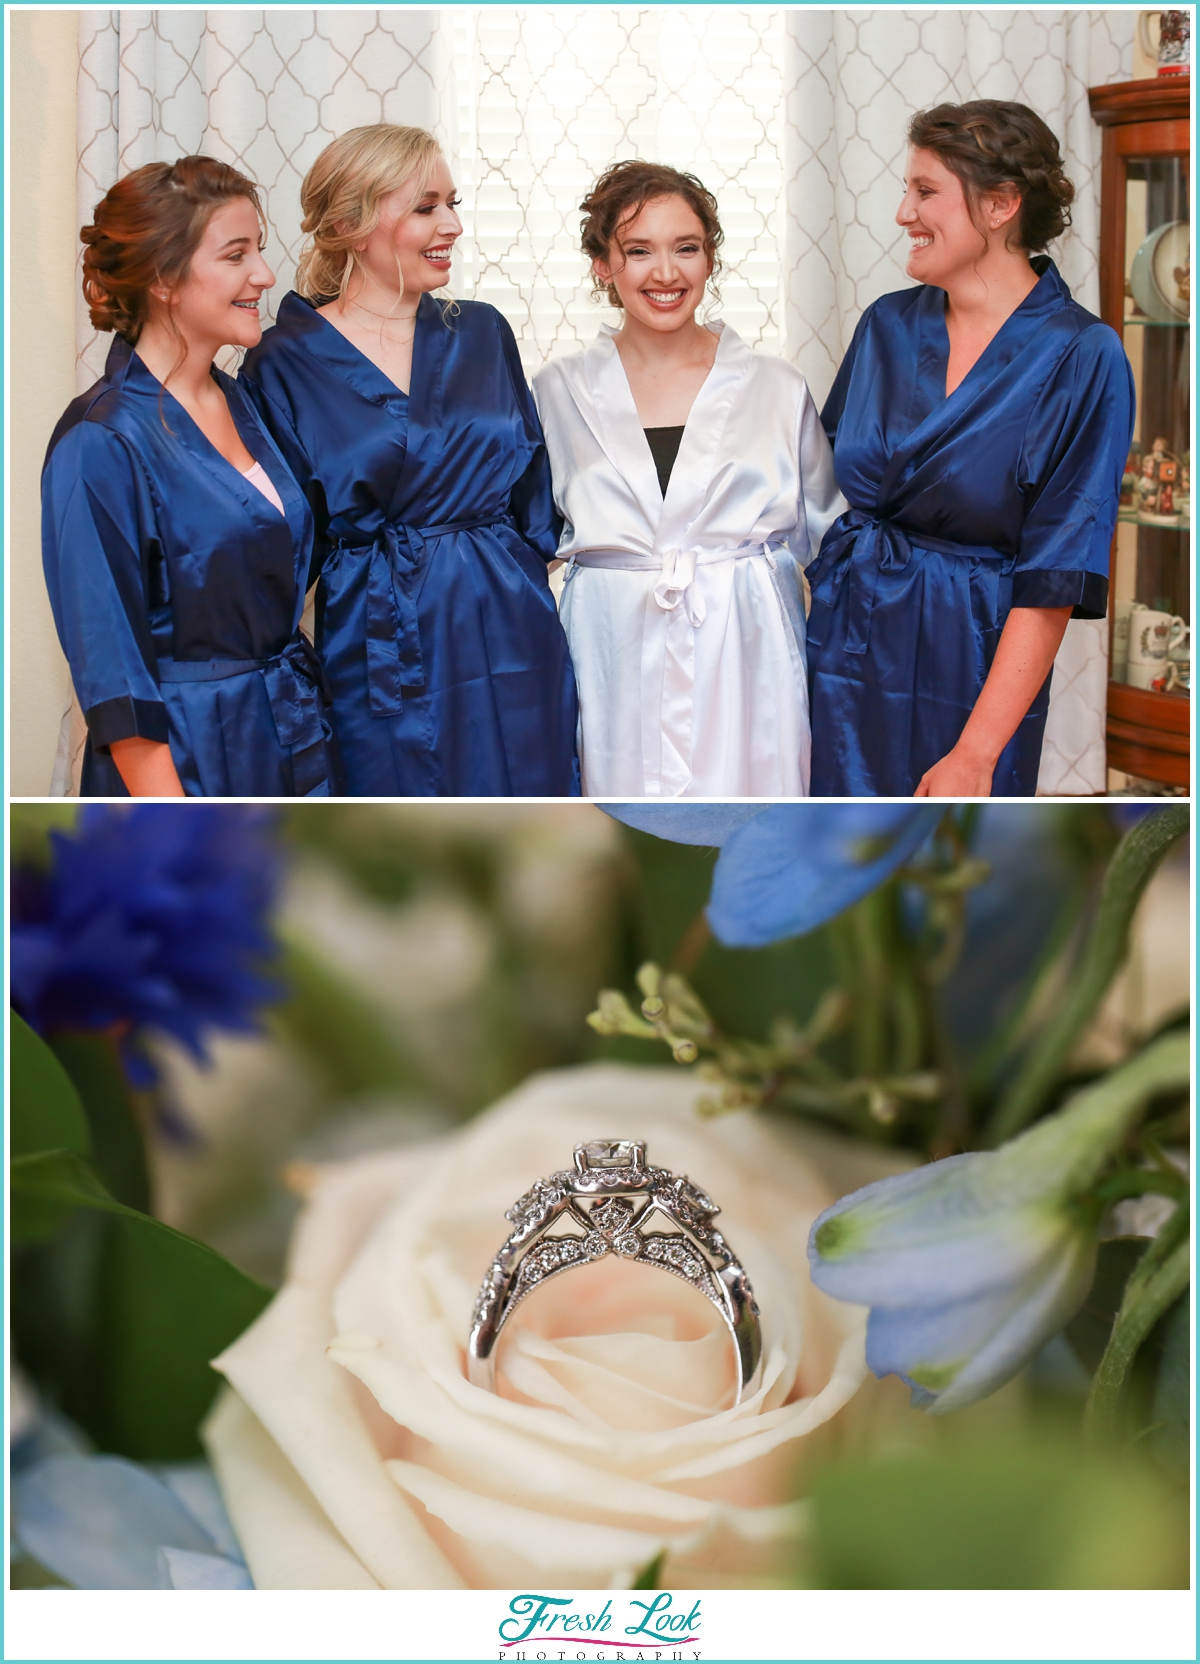 bride and bridesmaids in matching bathrobes